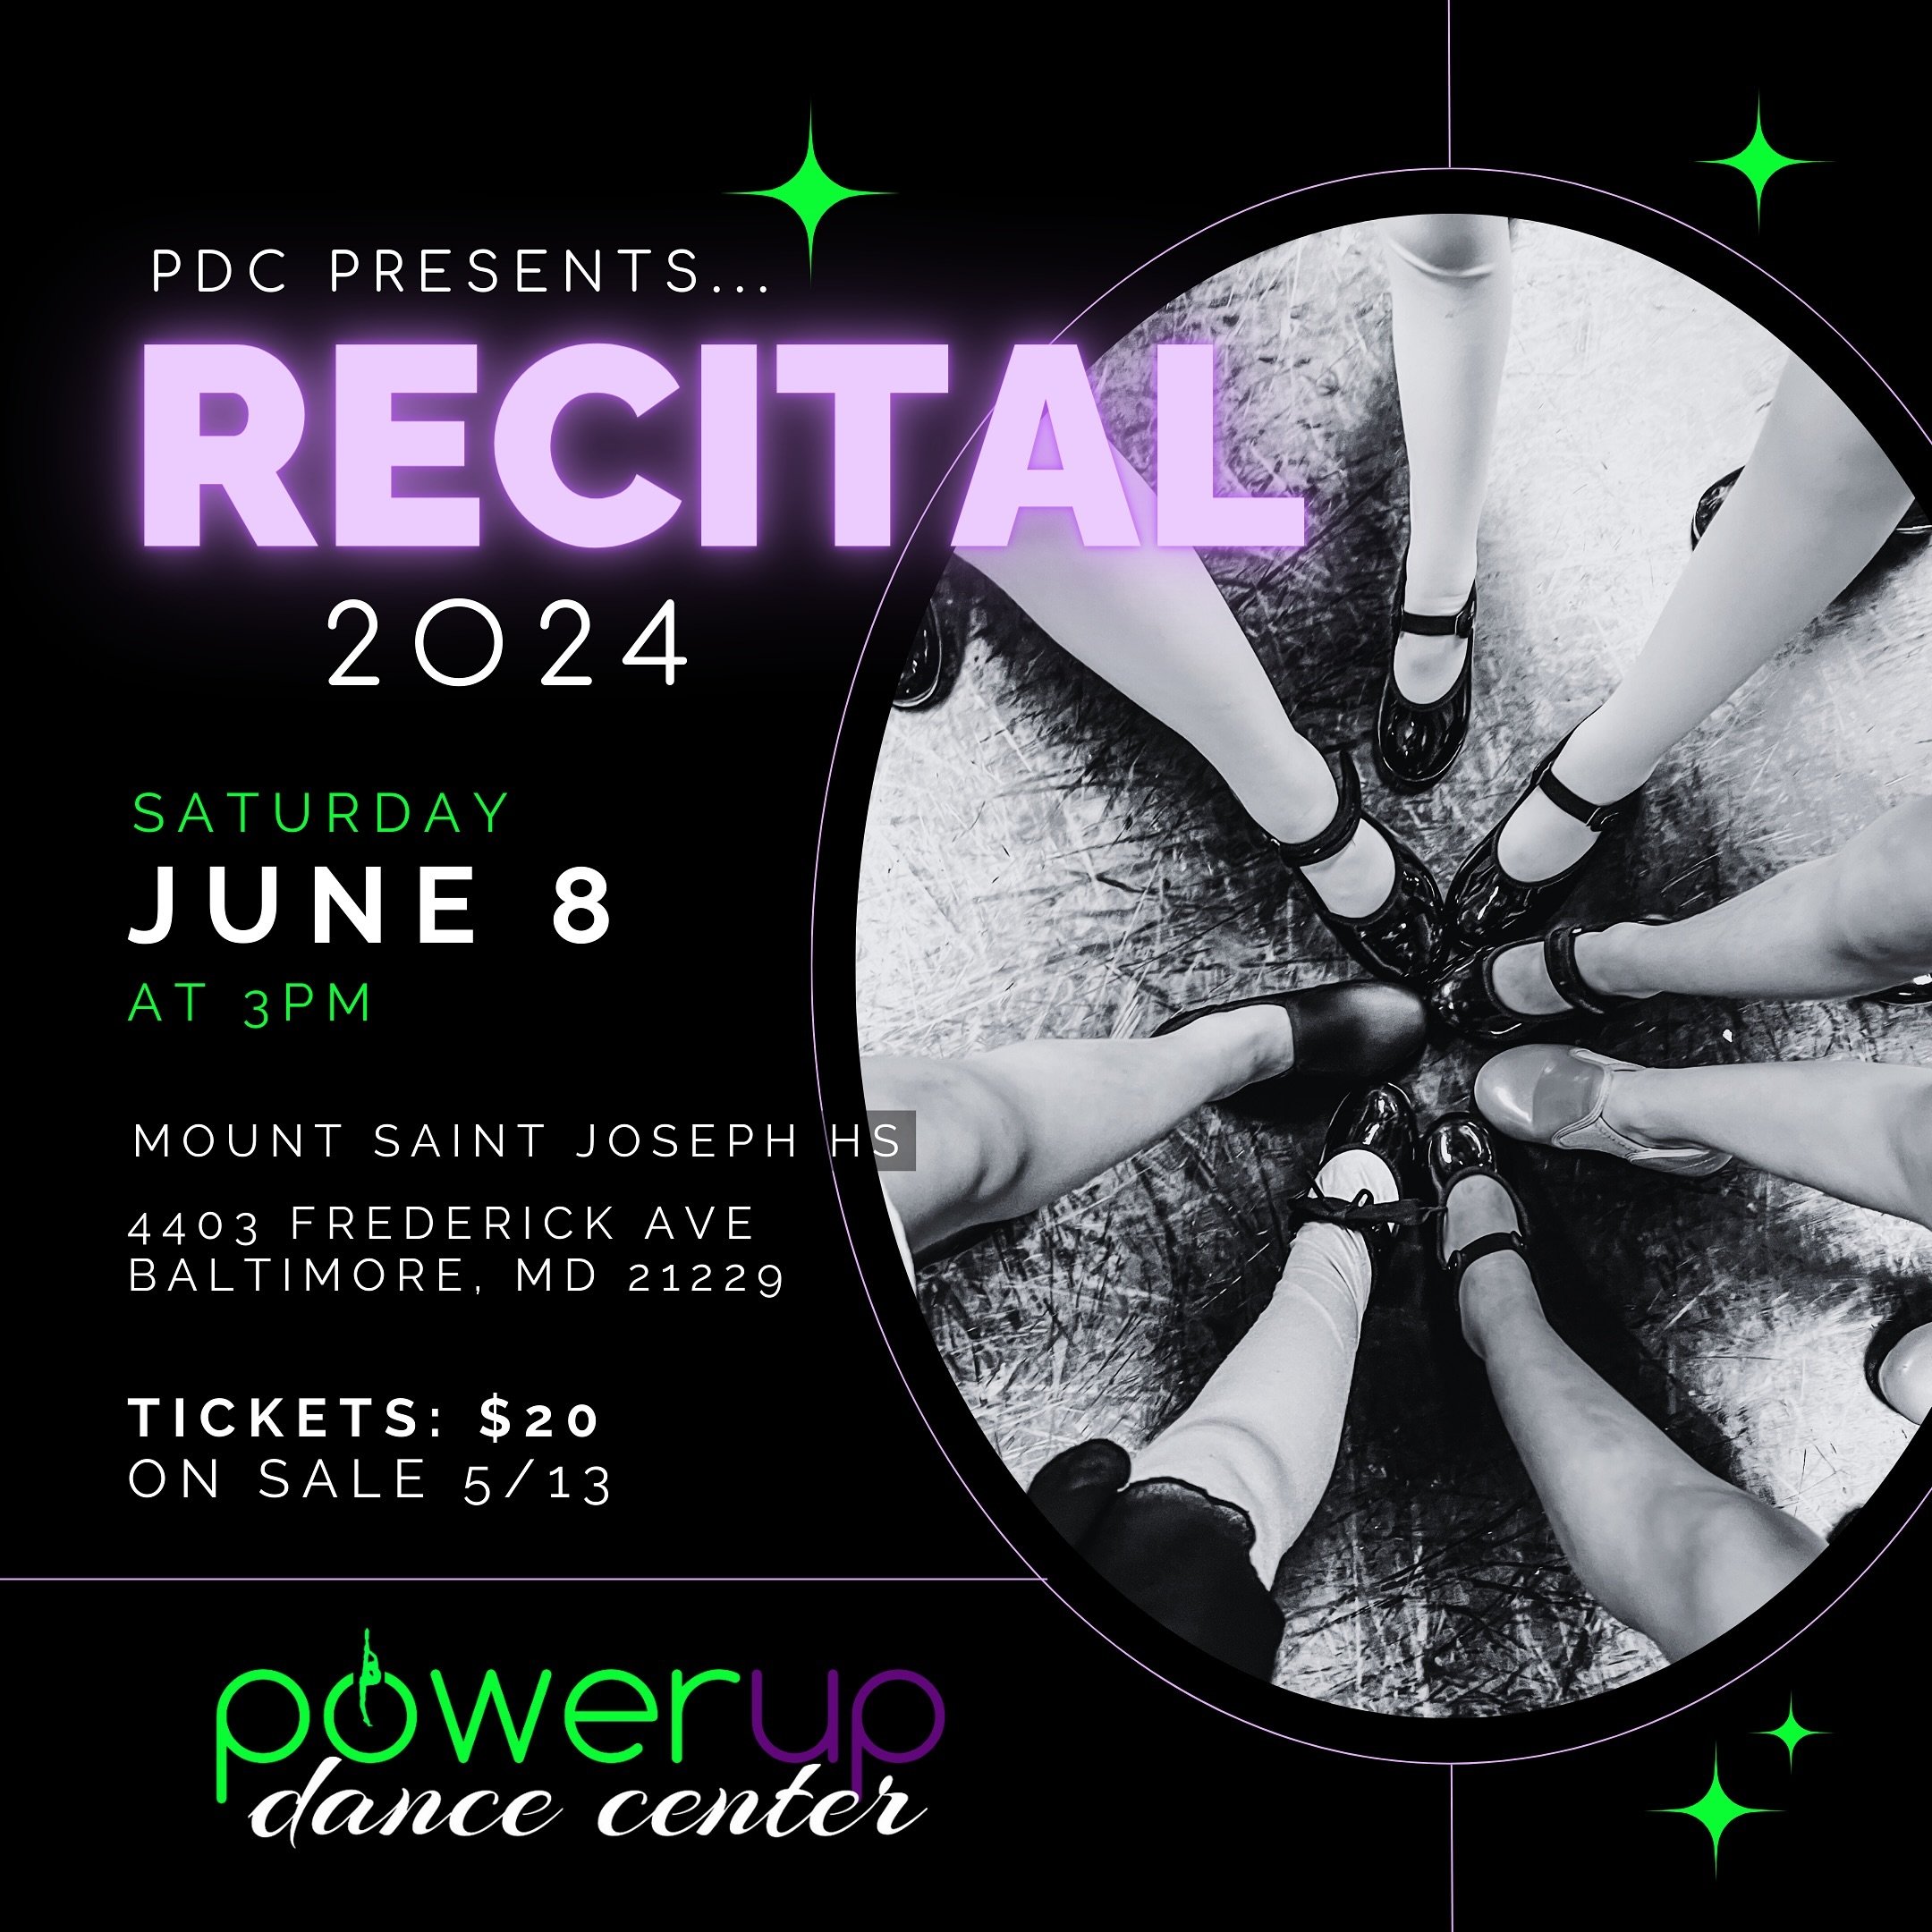 It&rsquo;s that time of year again! ✨ Questions? Email us at powerupdance@gmail.com 

2024 RECITAL
Saturday, June 8th at 3pm

Mount Saint Joseph High School
4403 Frederick Ave, Baltimore, MD 21229

TICKETS: $20 (on sale in-studio starting May 13)
*Pa